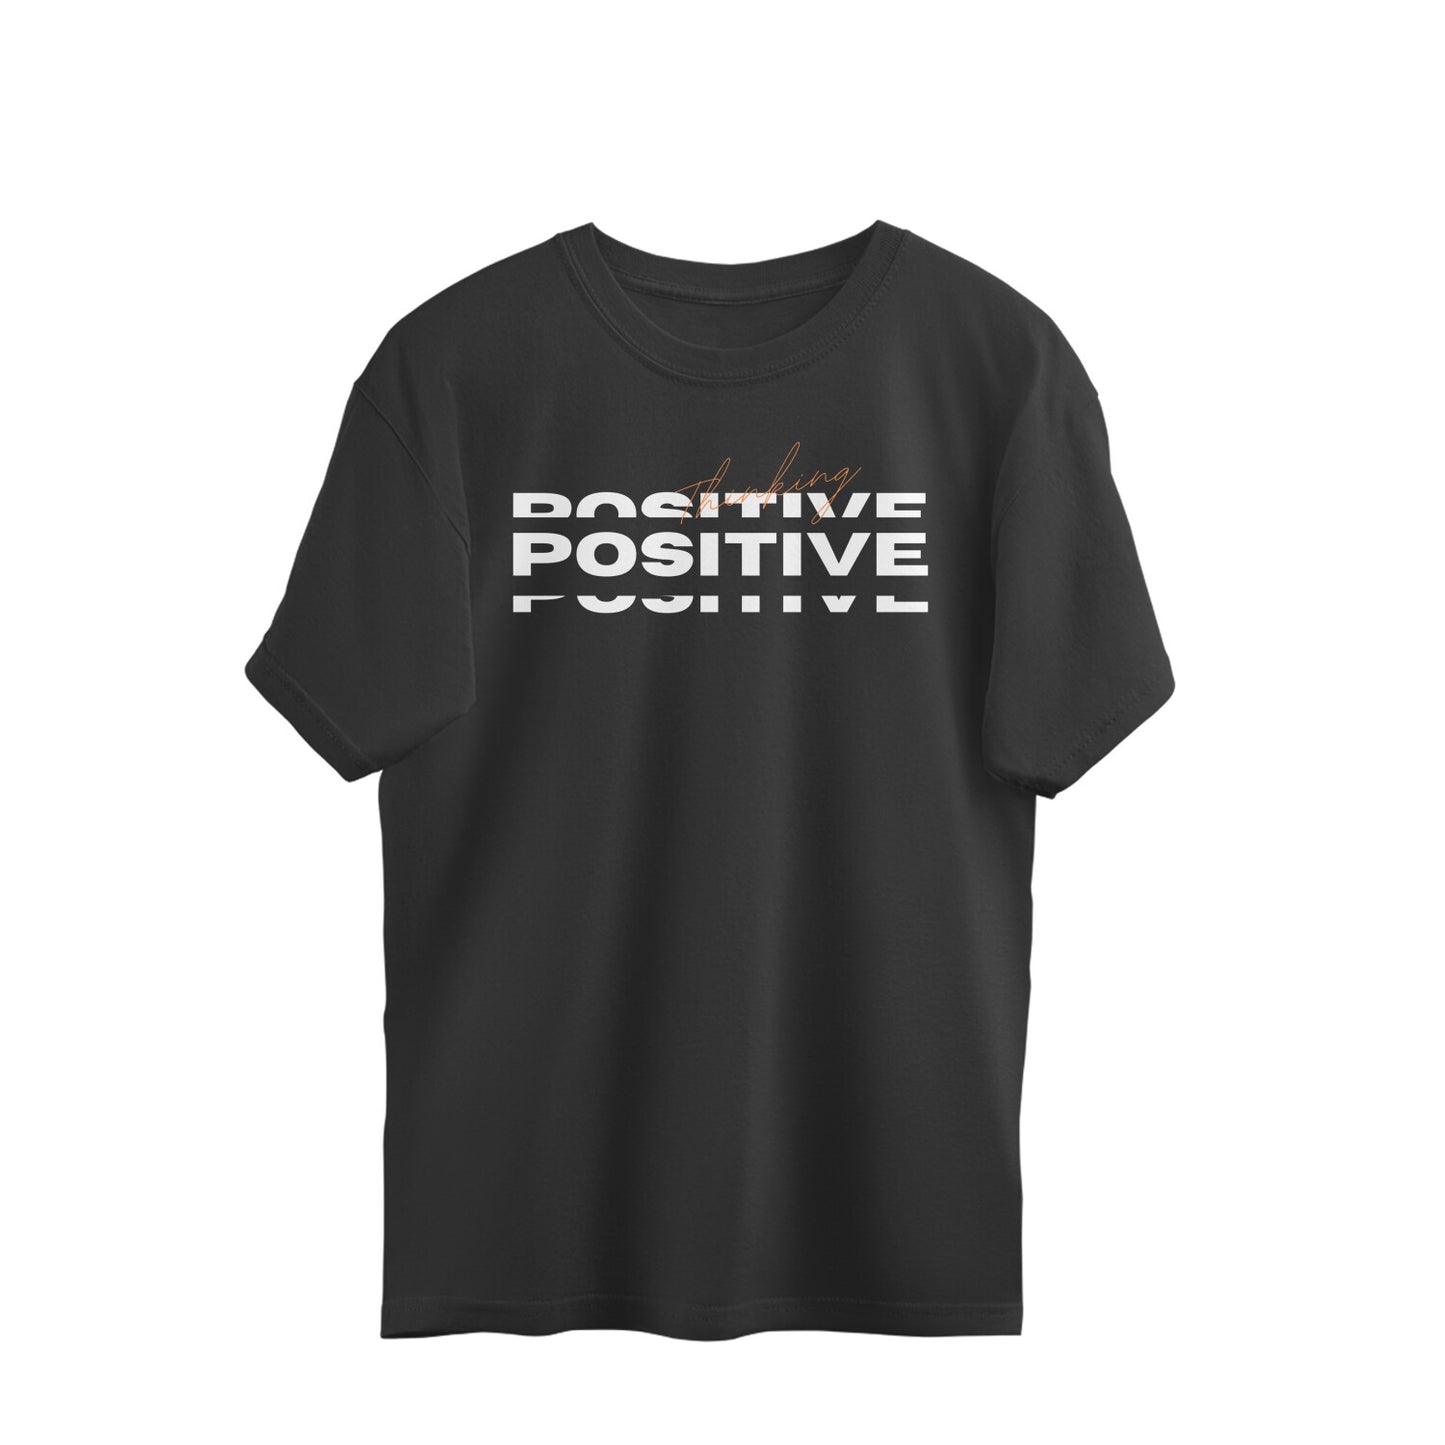 Positive Over sized T-shirt